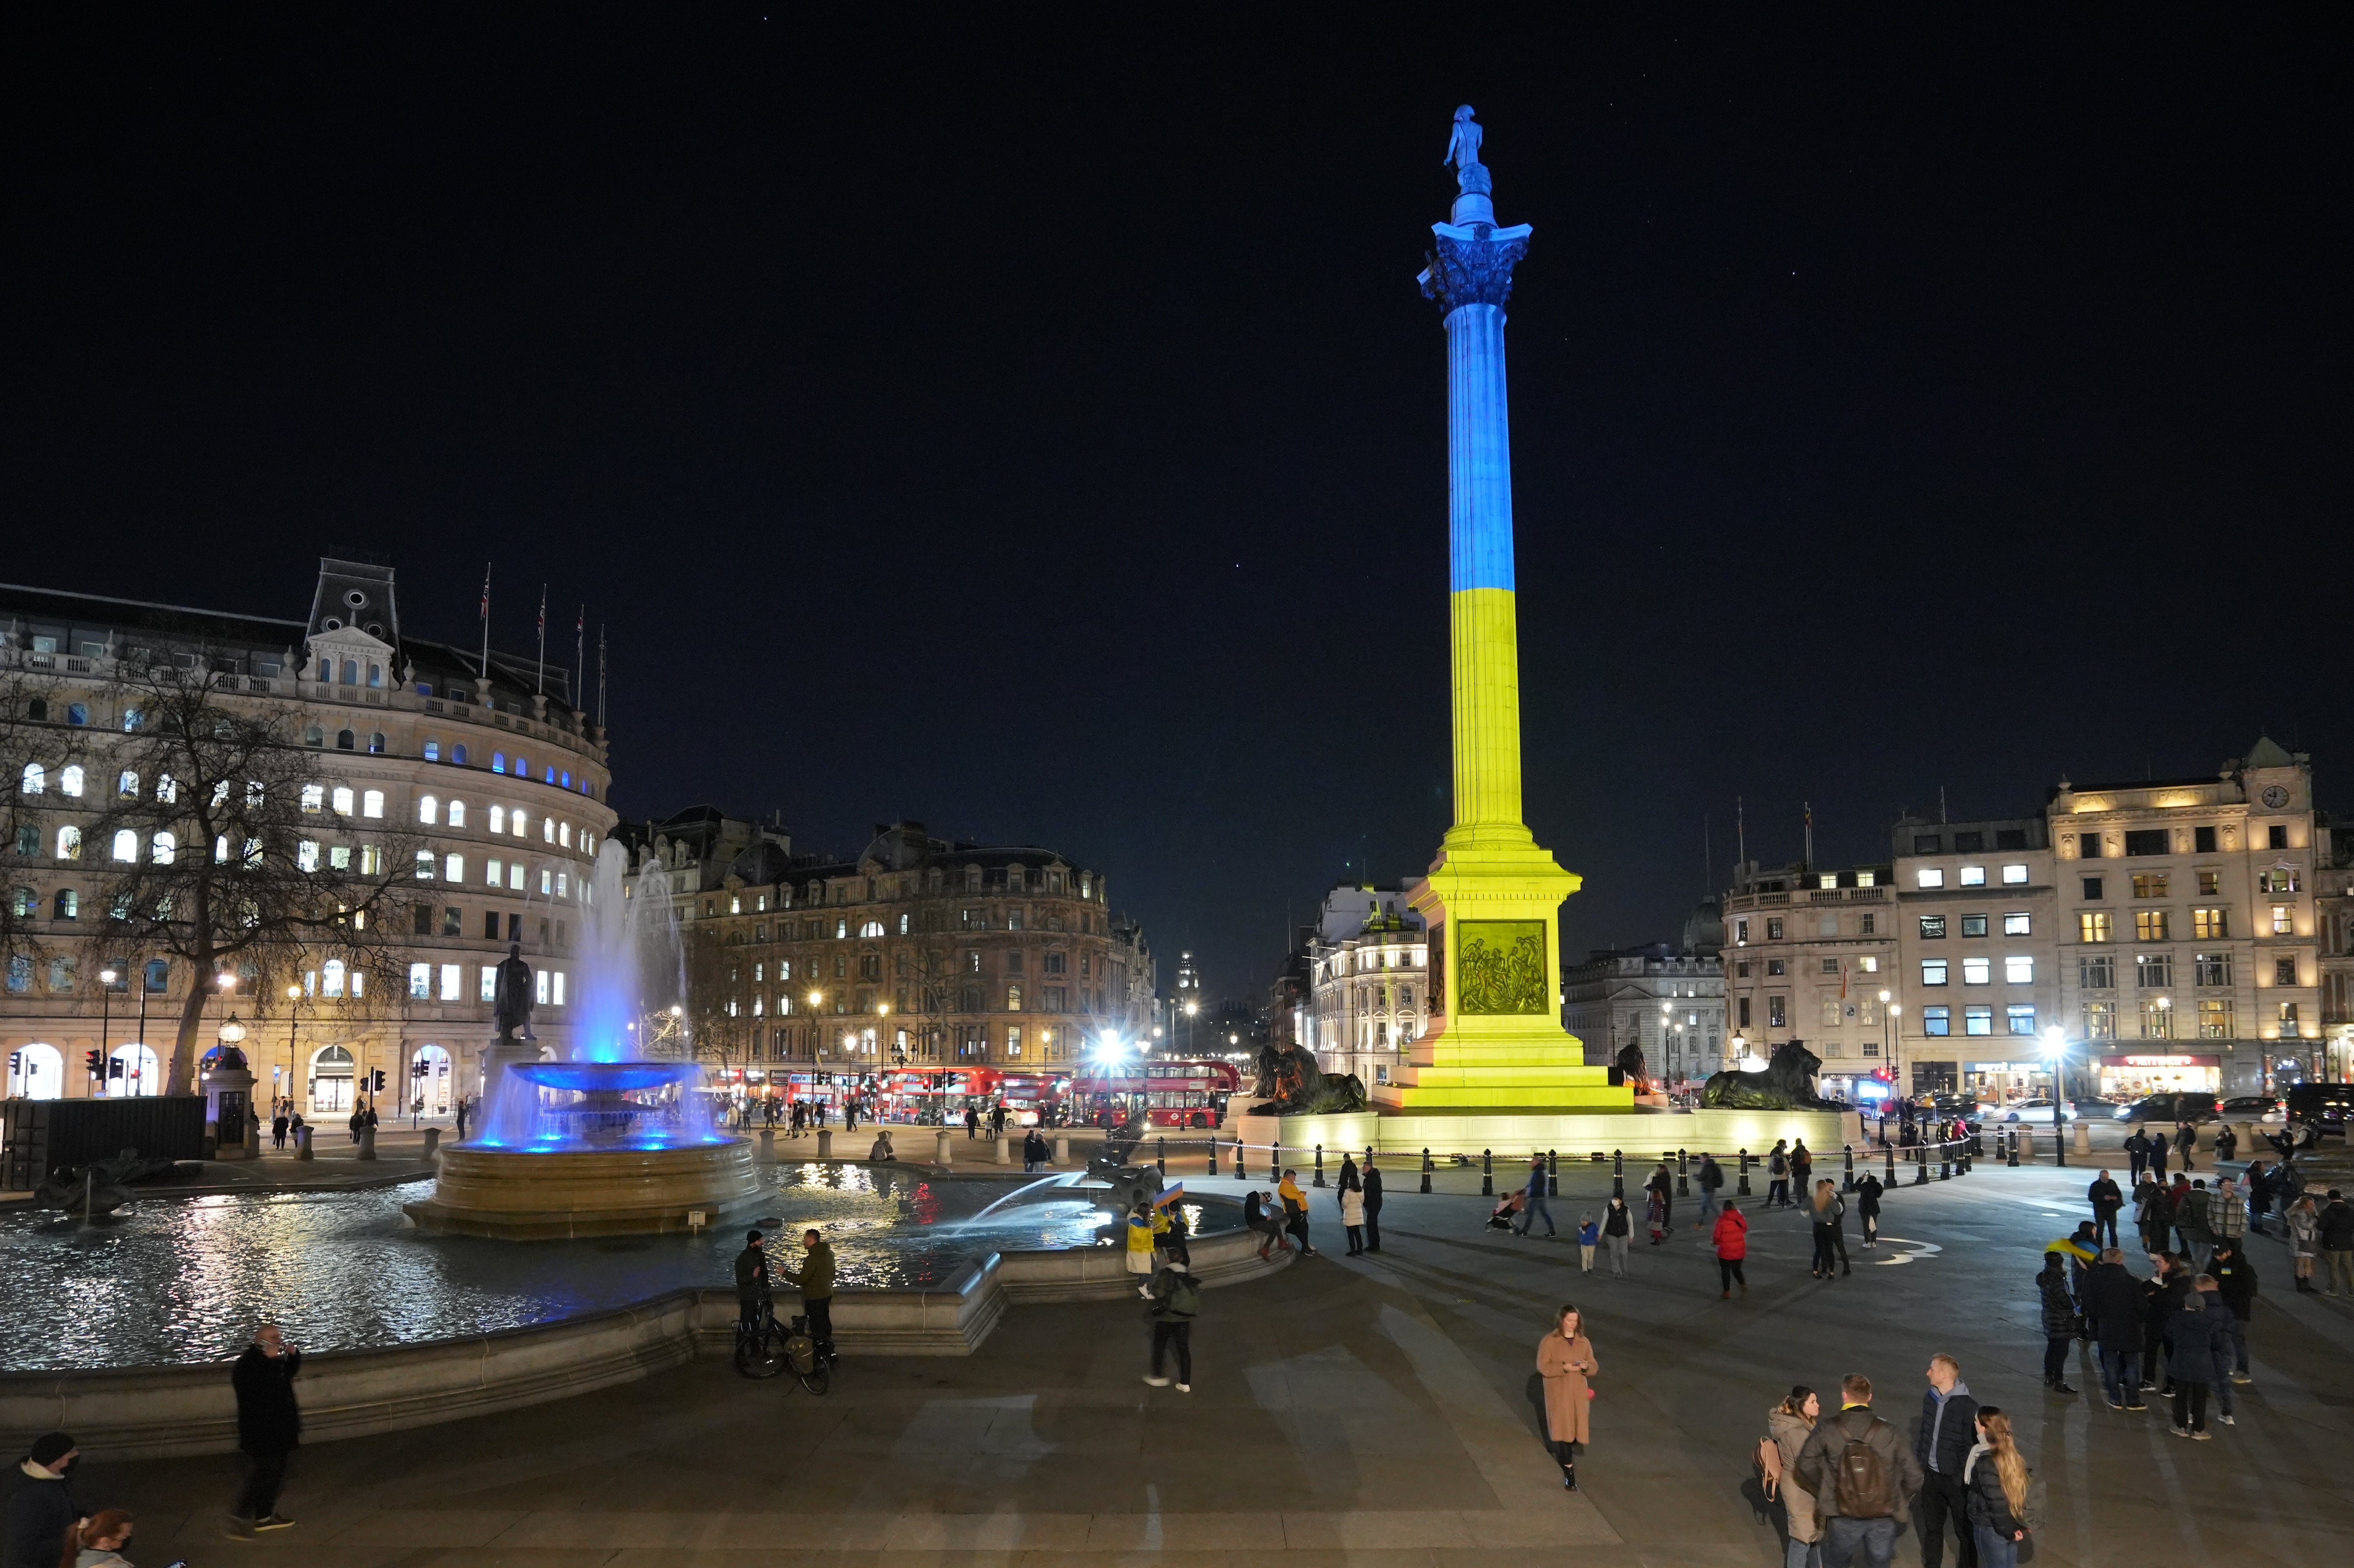 Nelson’s Column in Trafalgar Square, London, is lit up in yellow and blue in an expression of solidarity with Ukraine following Russia’s invasion (PA)